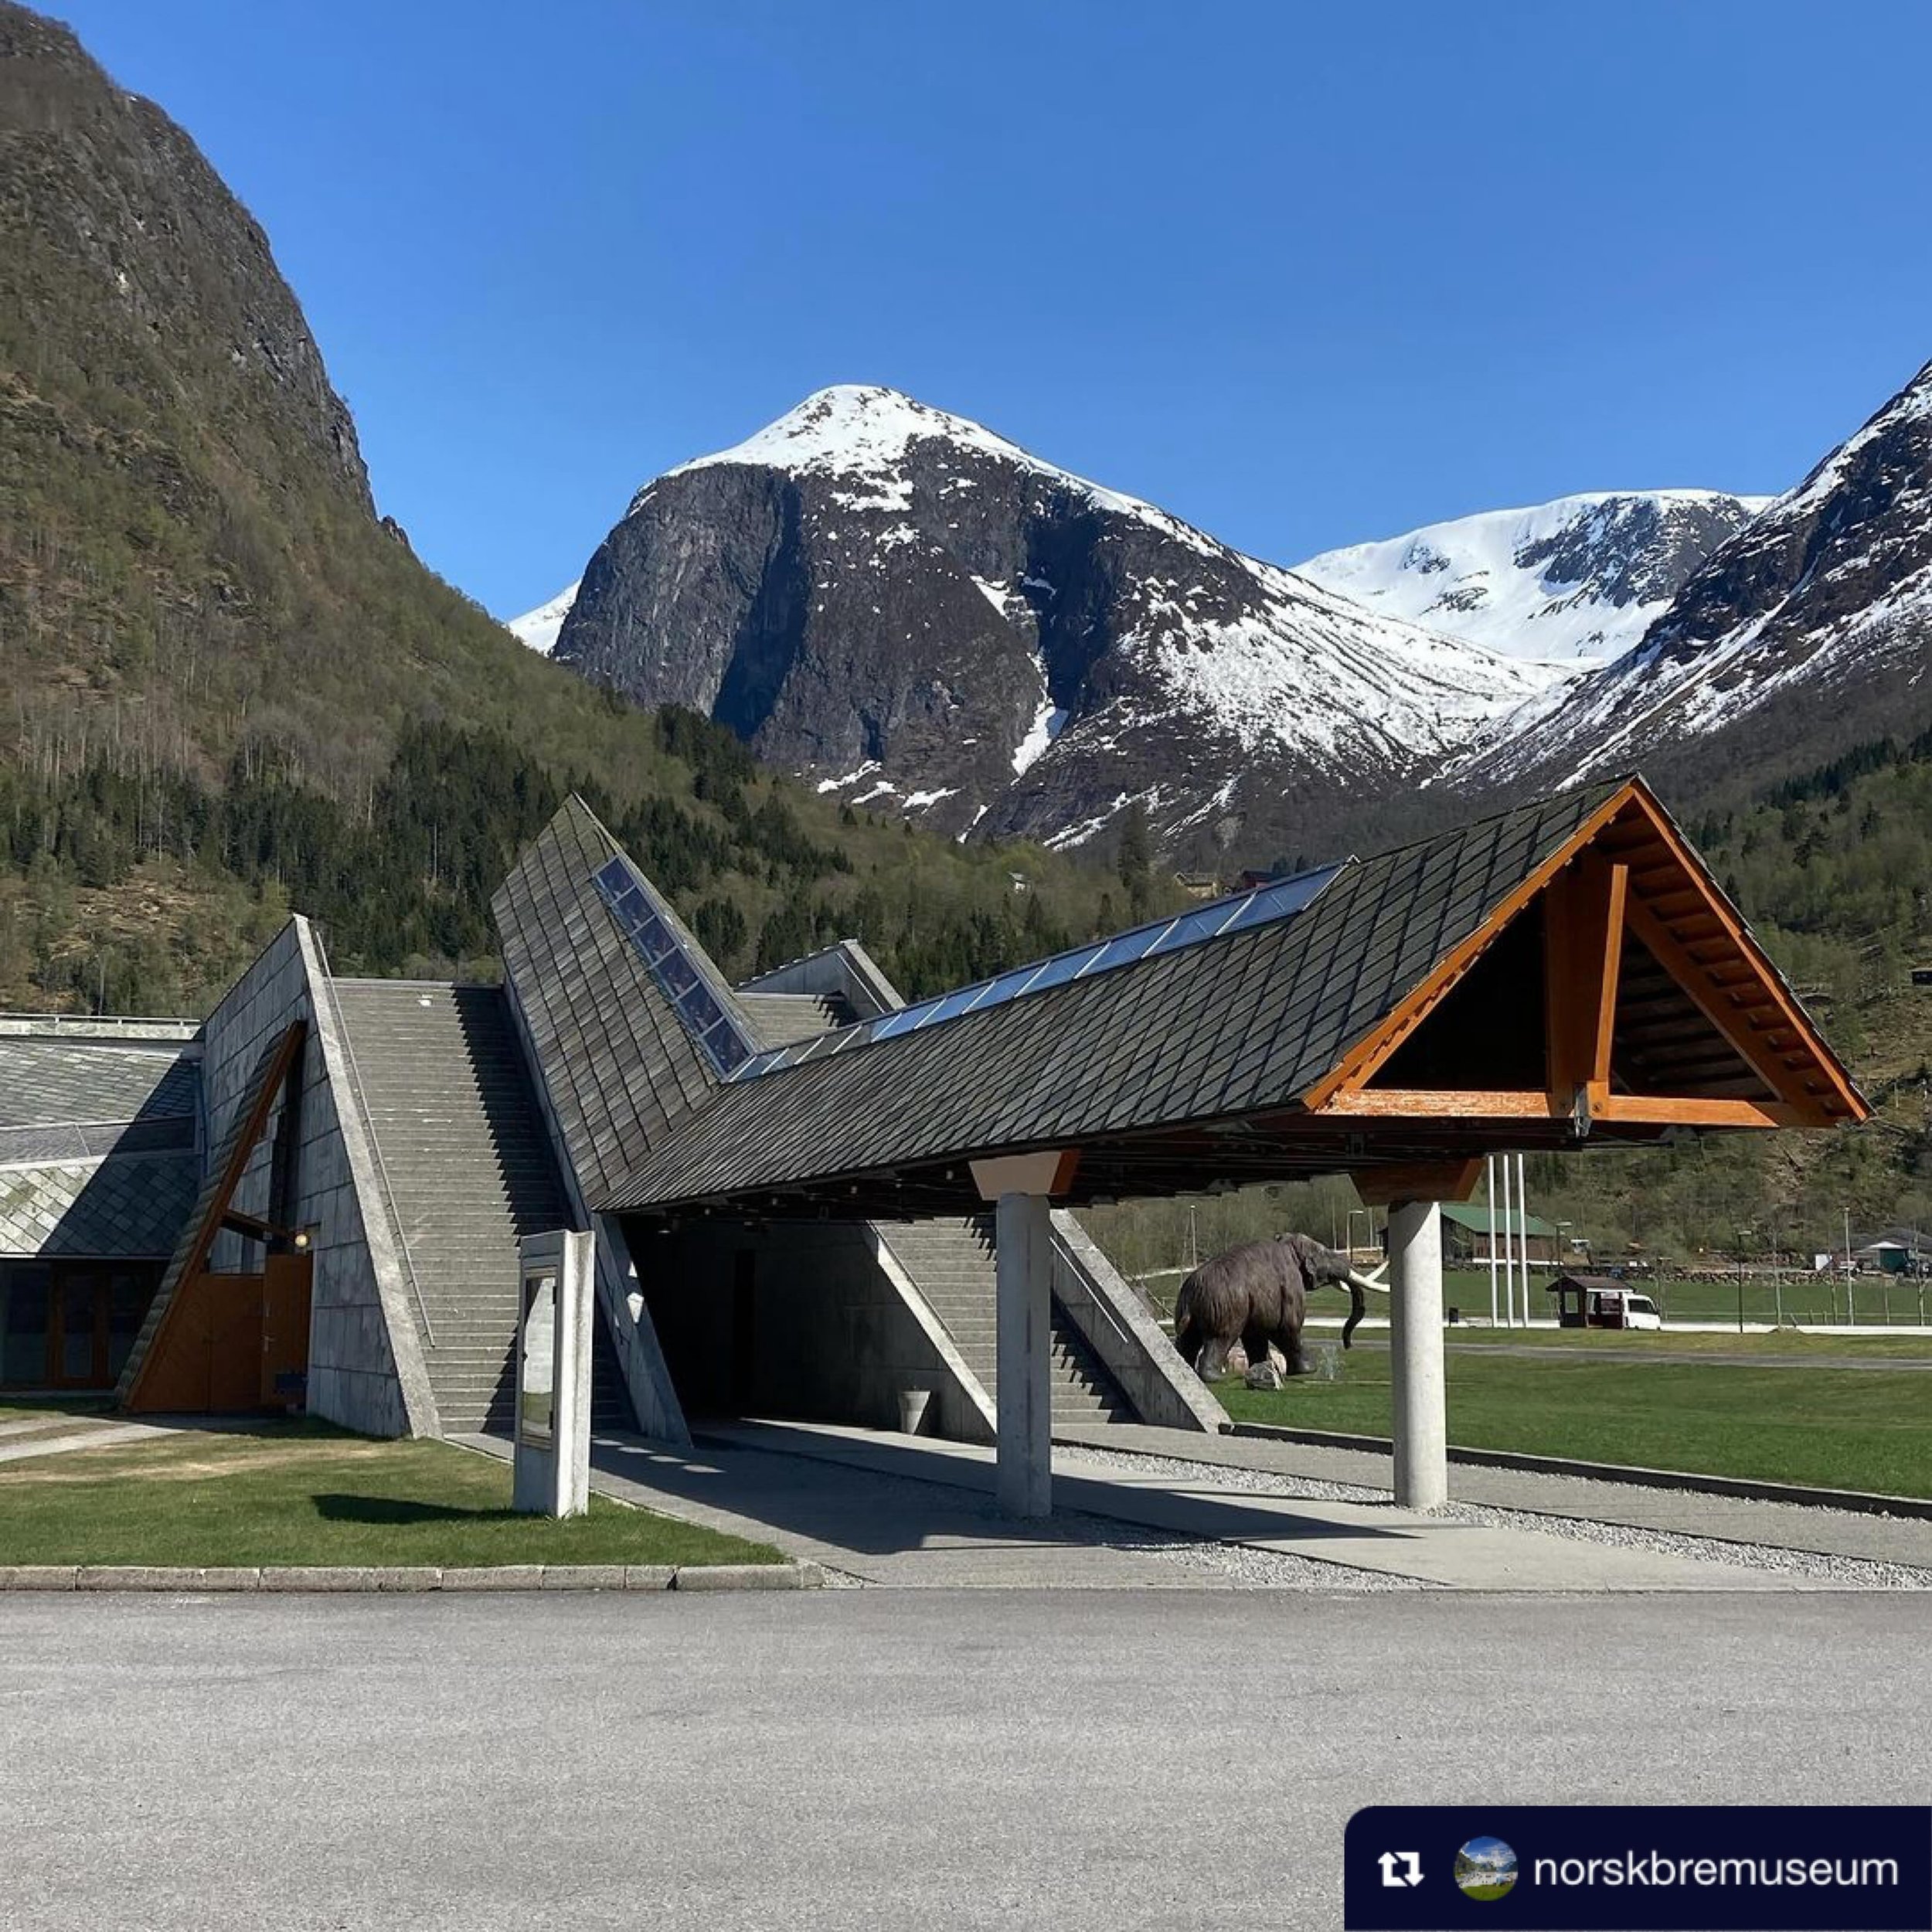 Repost from @norskbremuseum
&bull;
Open every day 10.00 - 16.00.

See our panoramic movie about Jostedalsbreen glacier ☺️

Welcome!

#fj&aelig;rland #fj&aelig;rlandfr&aring;fjordtilfjell #fj&aelig;rlandsfjorden #sogndal #visitnorway #fjordnorway #vis